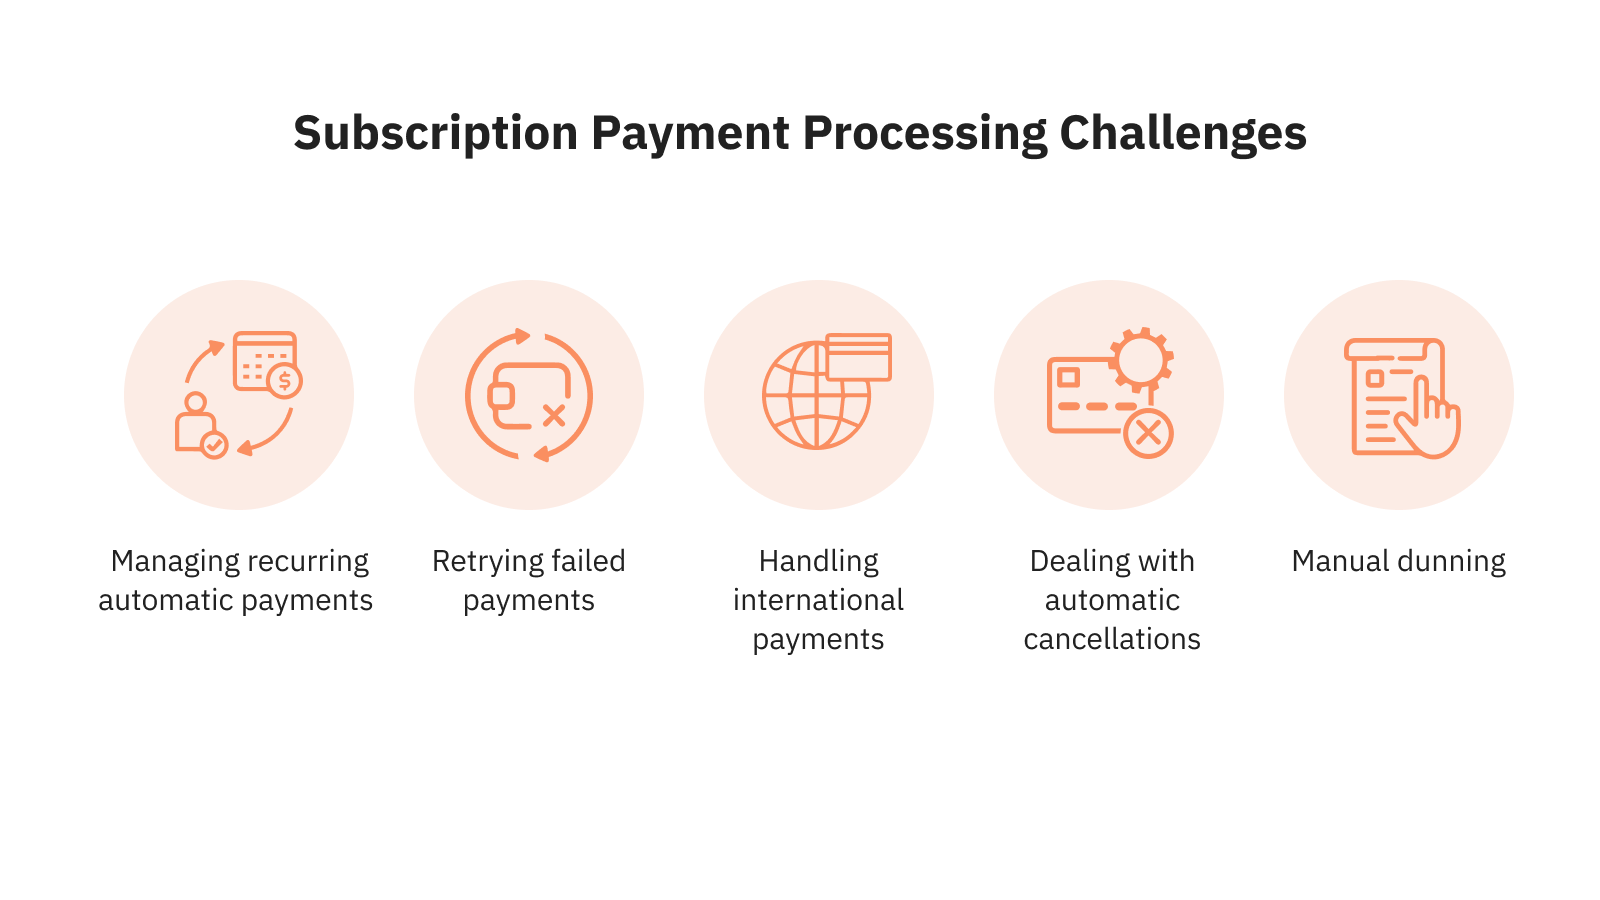 Challenges involved in subscription payment processing